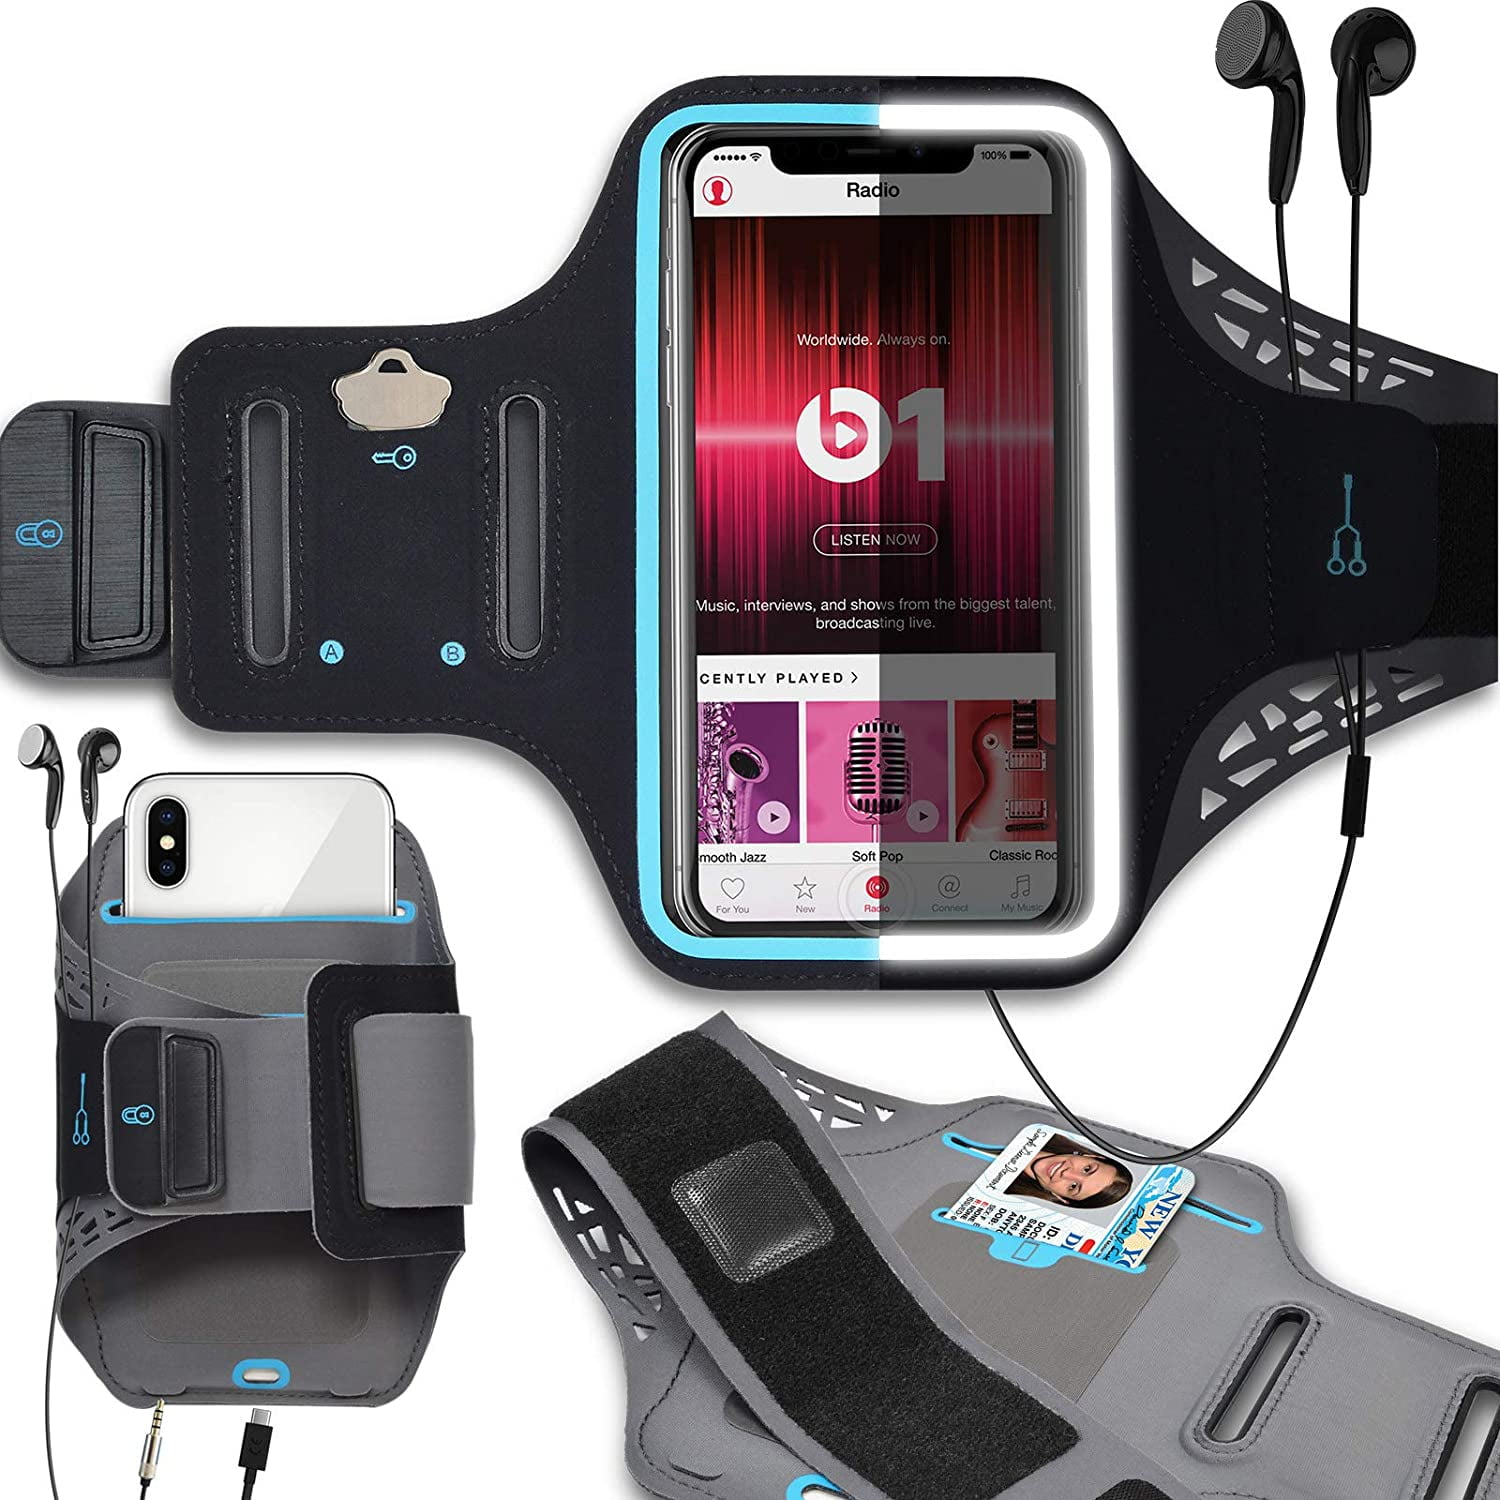 Armband/Galaxy S10 5G Armband/Galaxy S9 Plus Armband/Galaxy S8 Plus Armband J&D Armband Compatible for Galaxy S10 Plus Armband/Galaxy S10 Sports Armband with Key holder Slot and Earphone Connection 